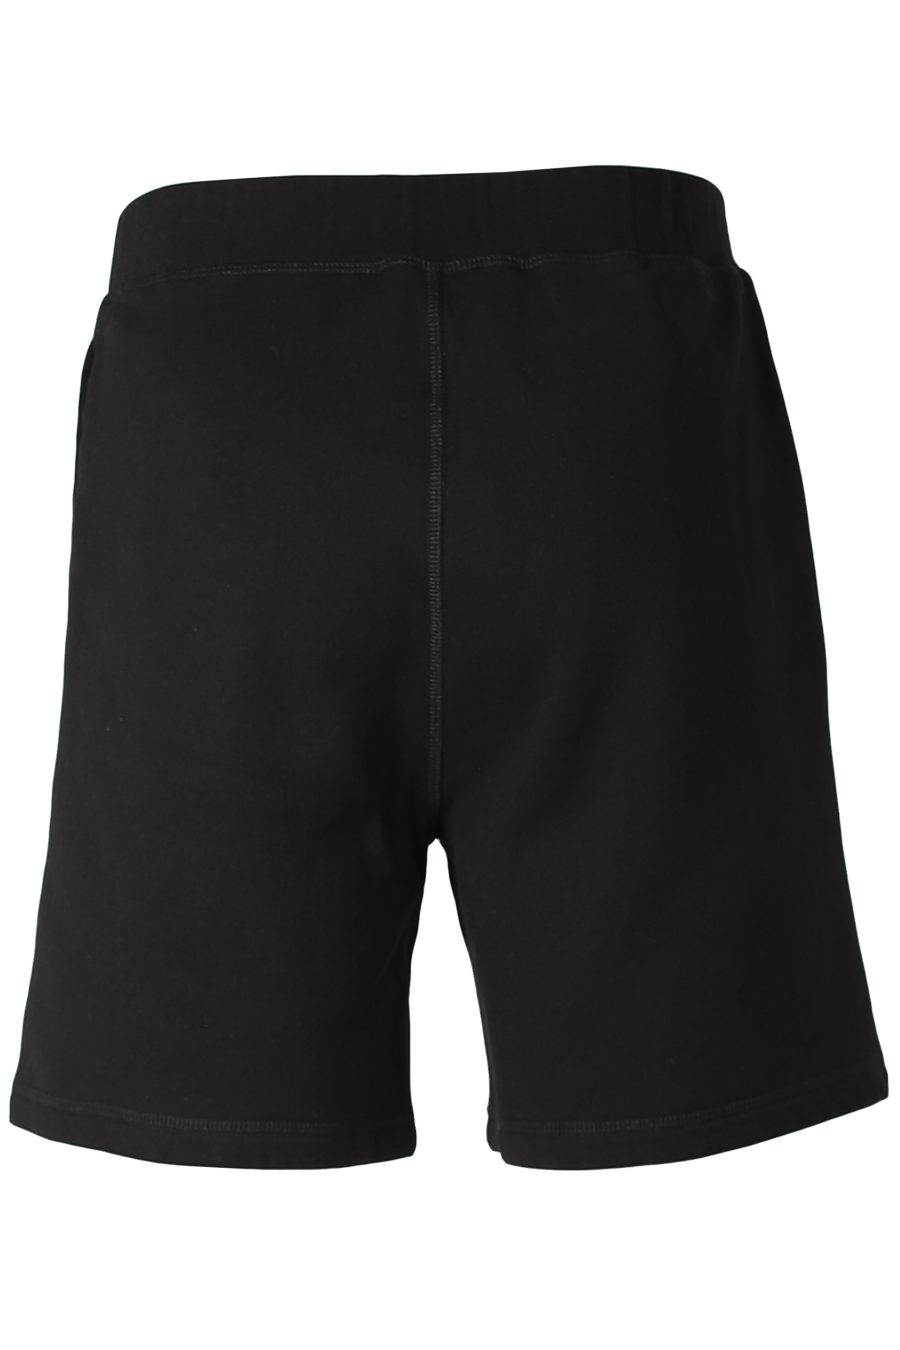 Black shorts with vertical "Icon" logo - IMG 2597